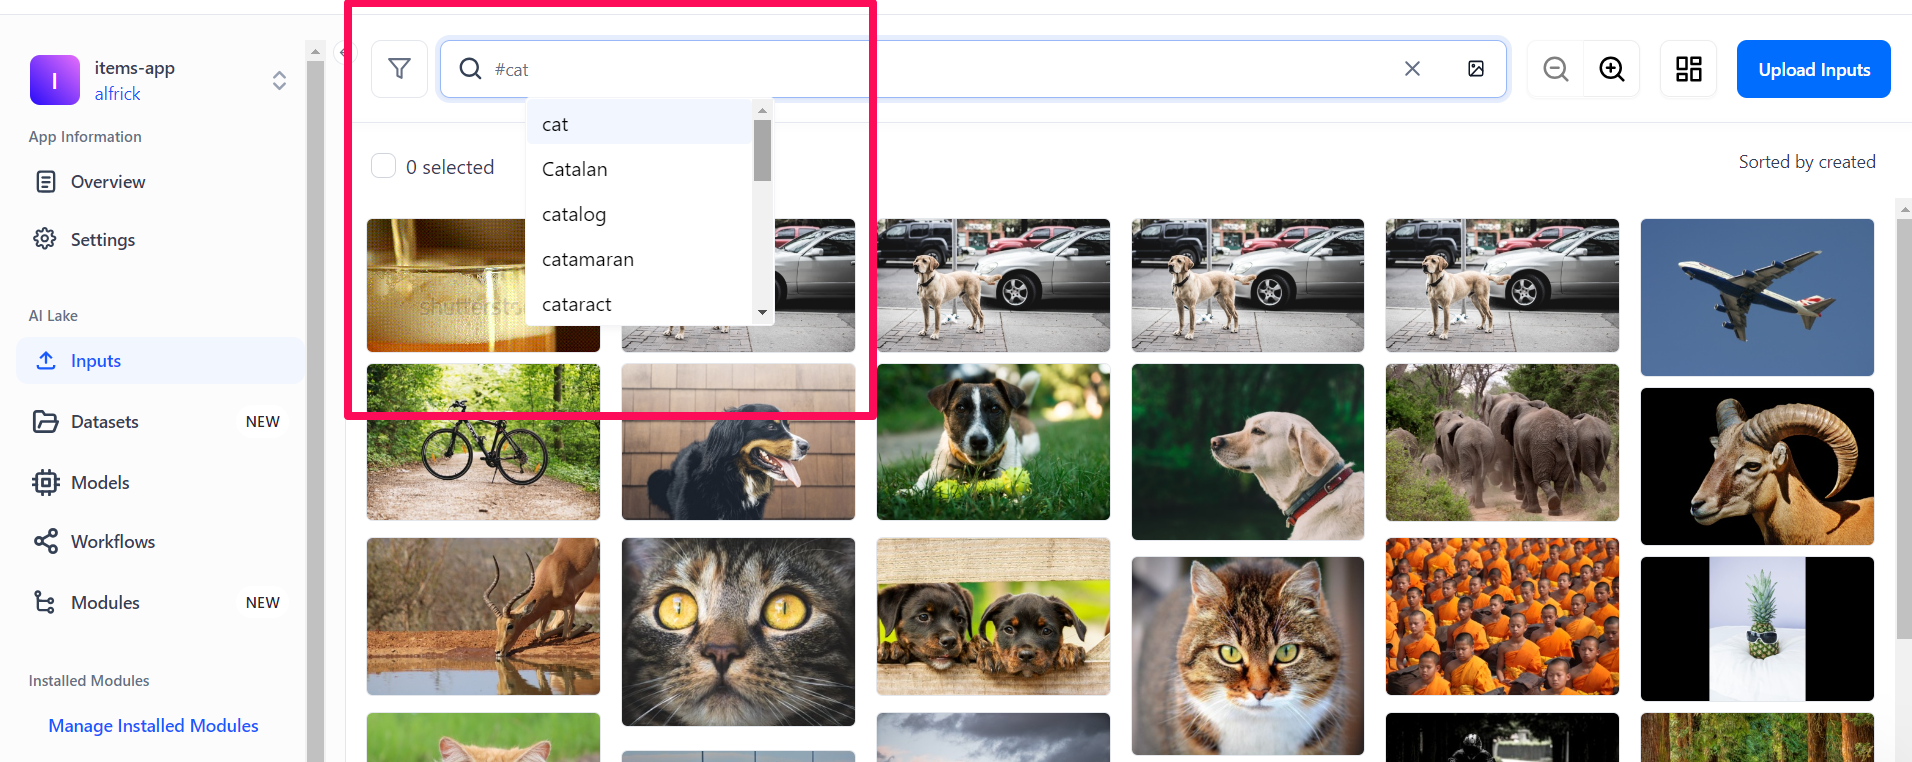 smart image search results